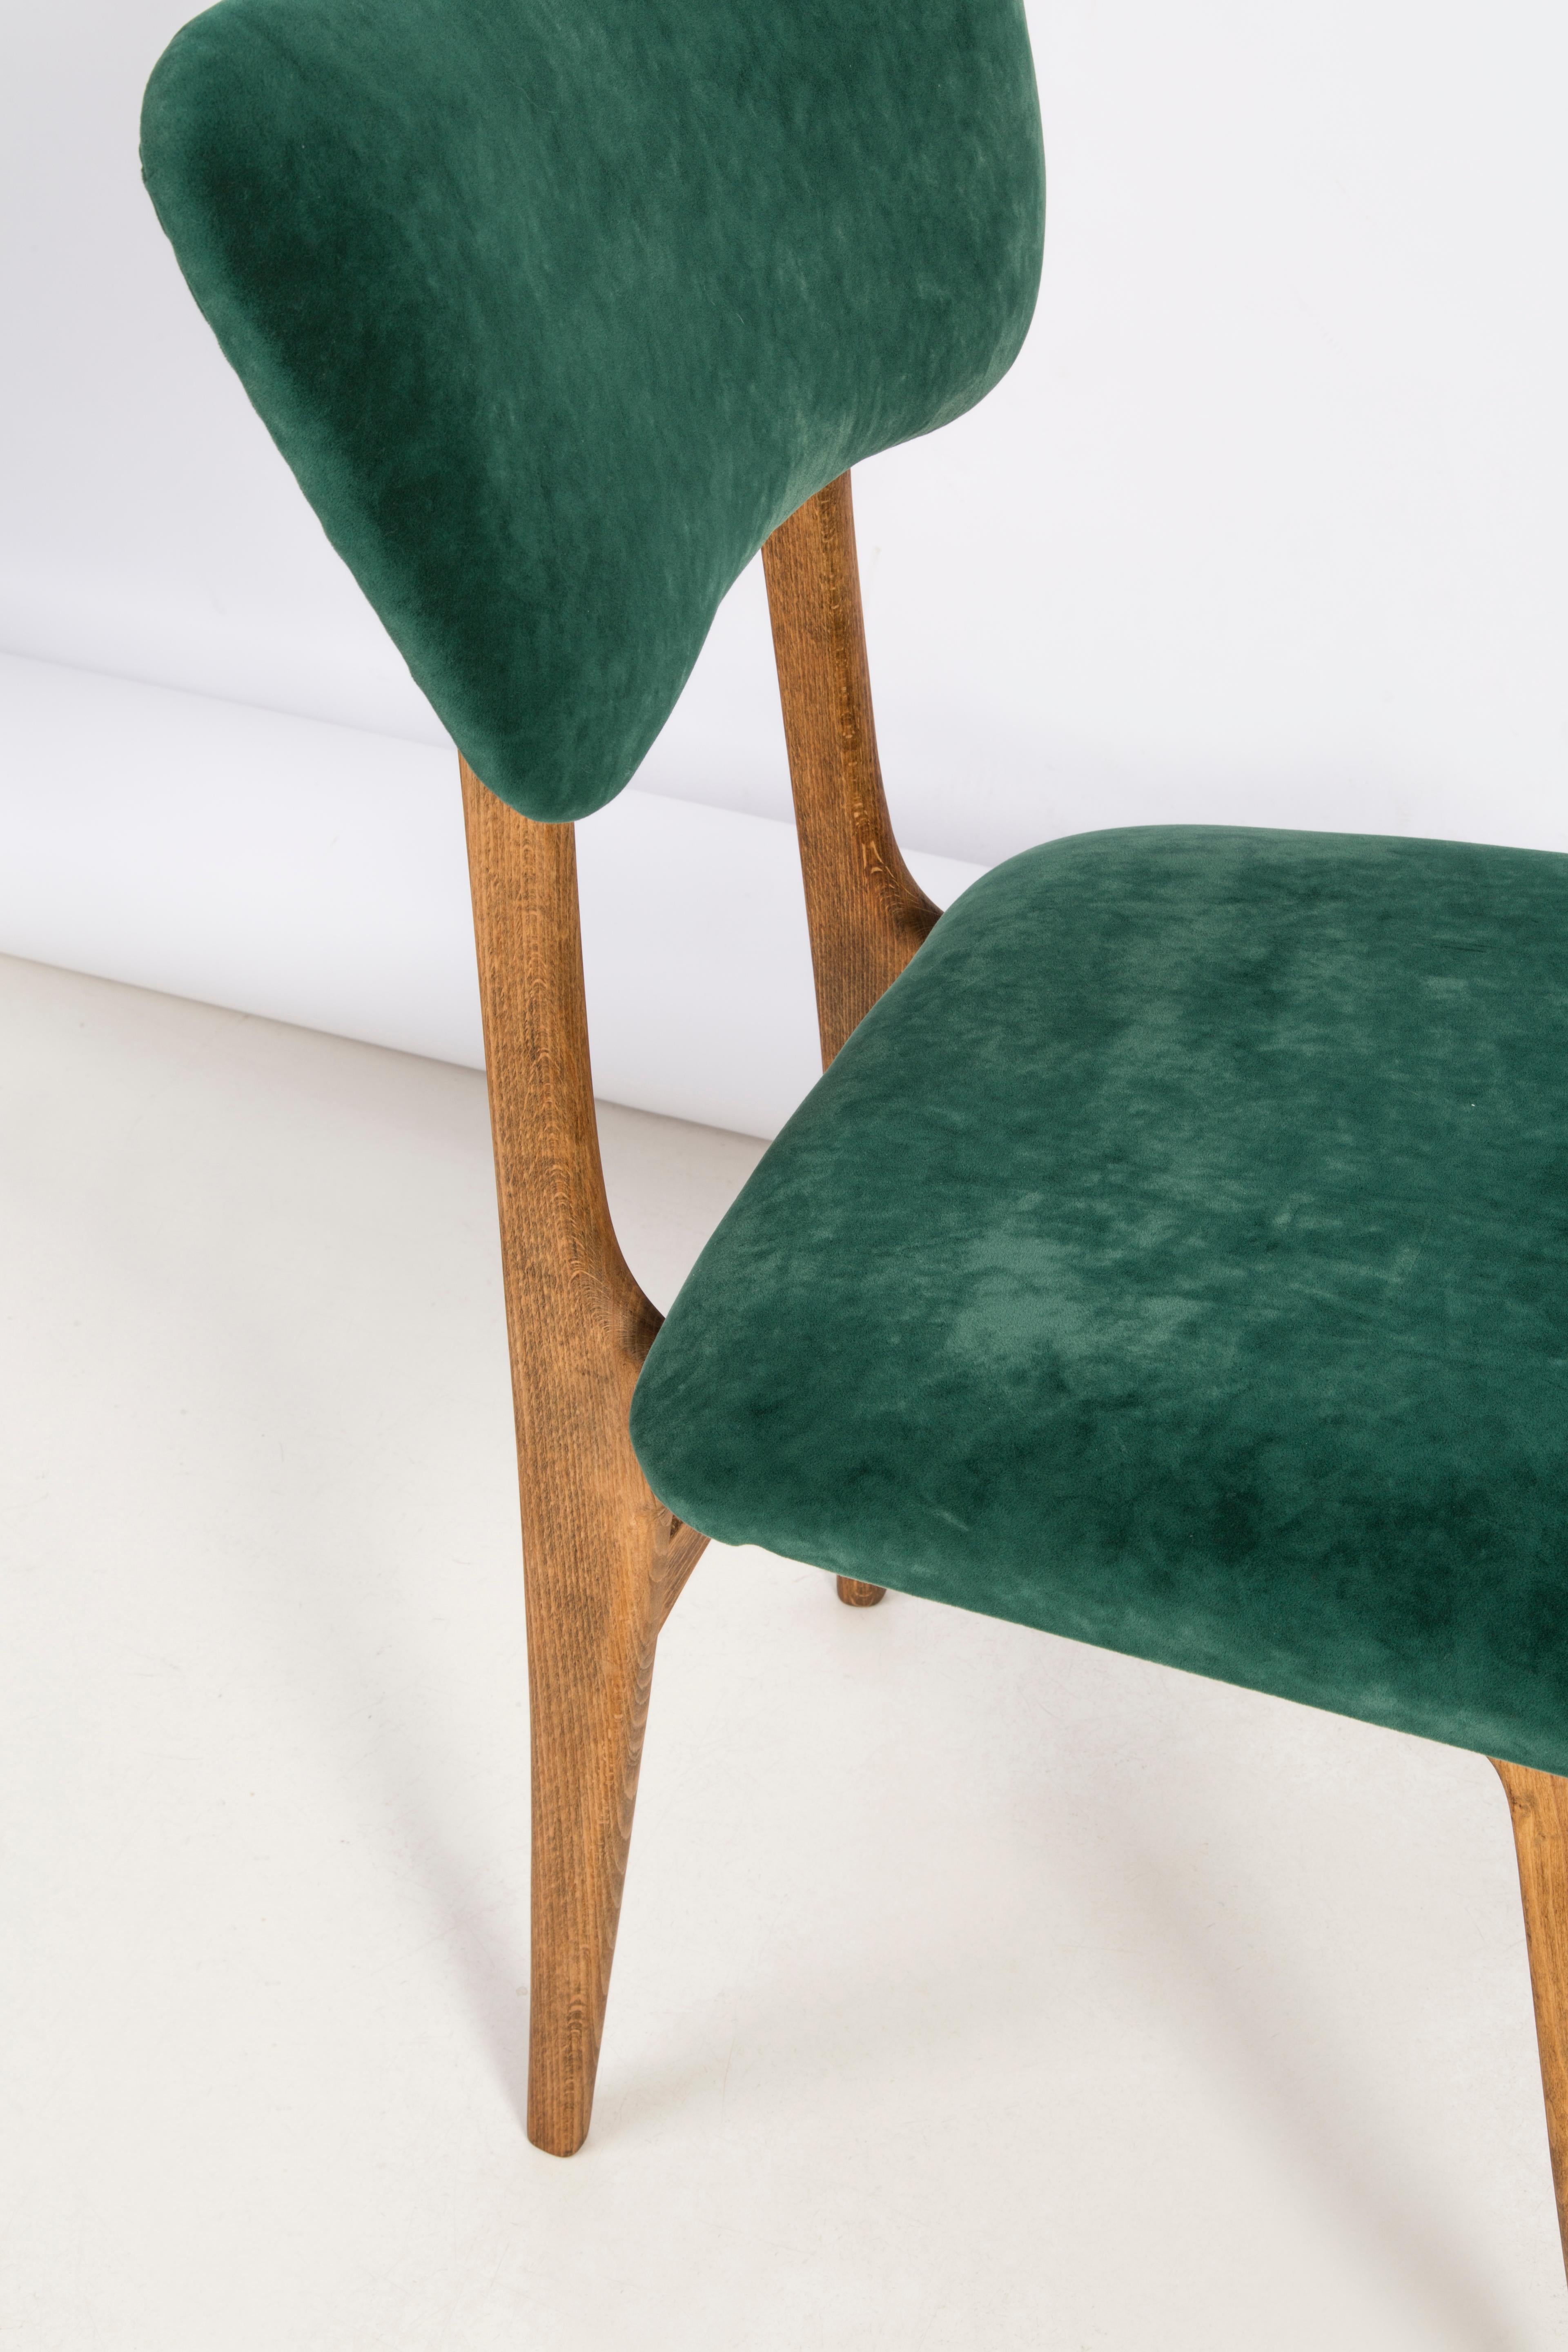 Hand-Crafted Set of Six 20th Century Dark Green Velvet Chairs, Europe, 1960s For Sale